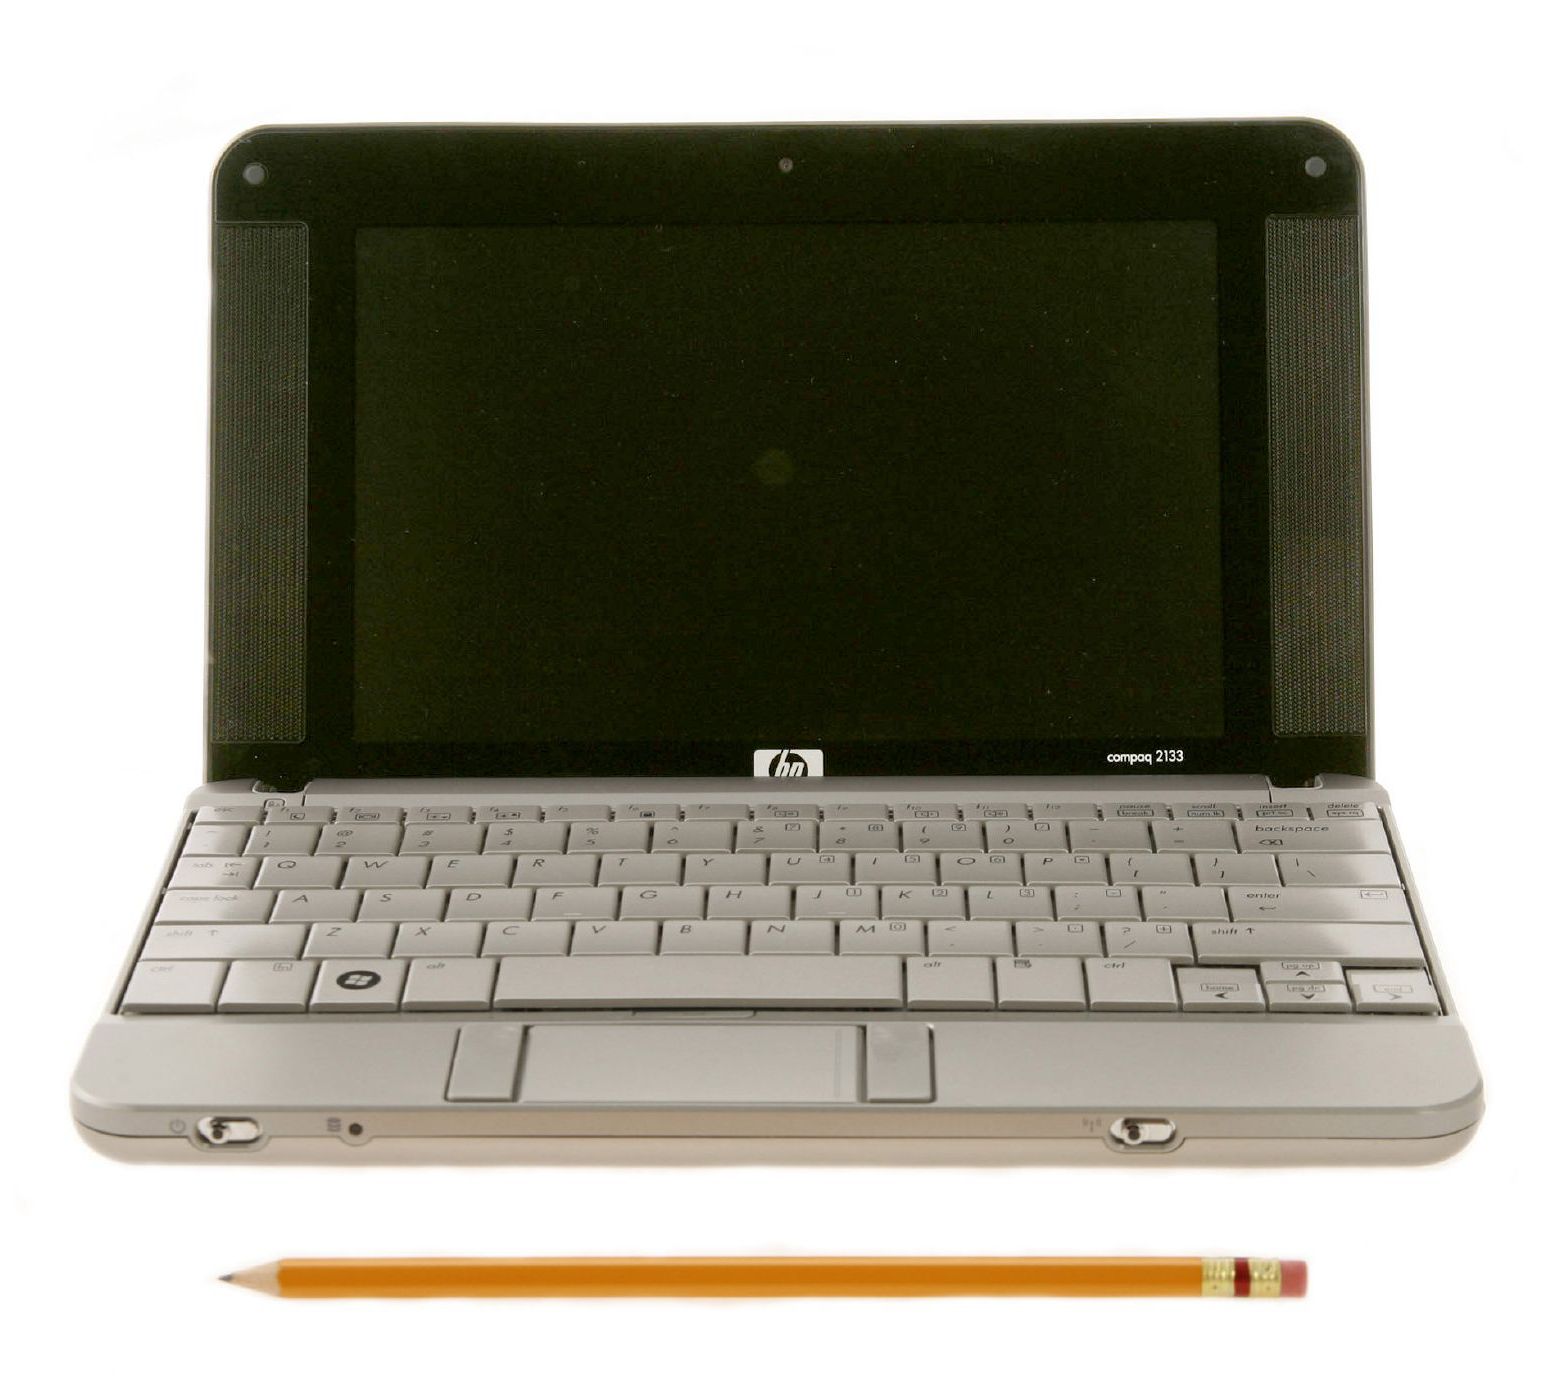 Netbook and pencil